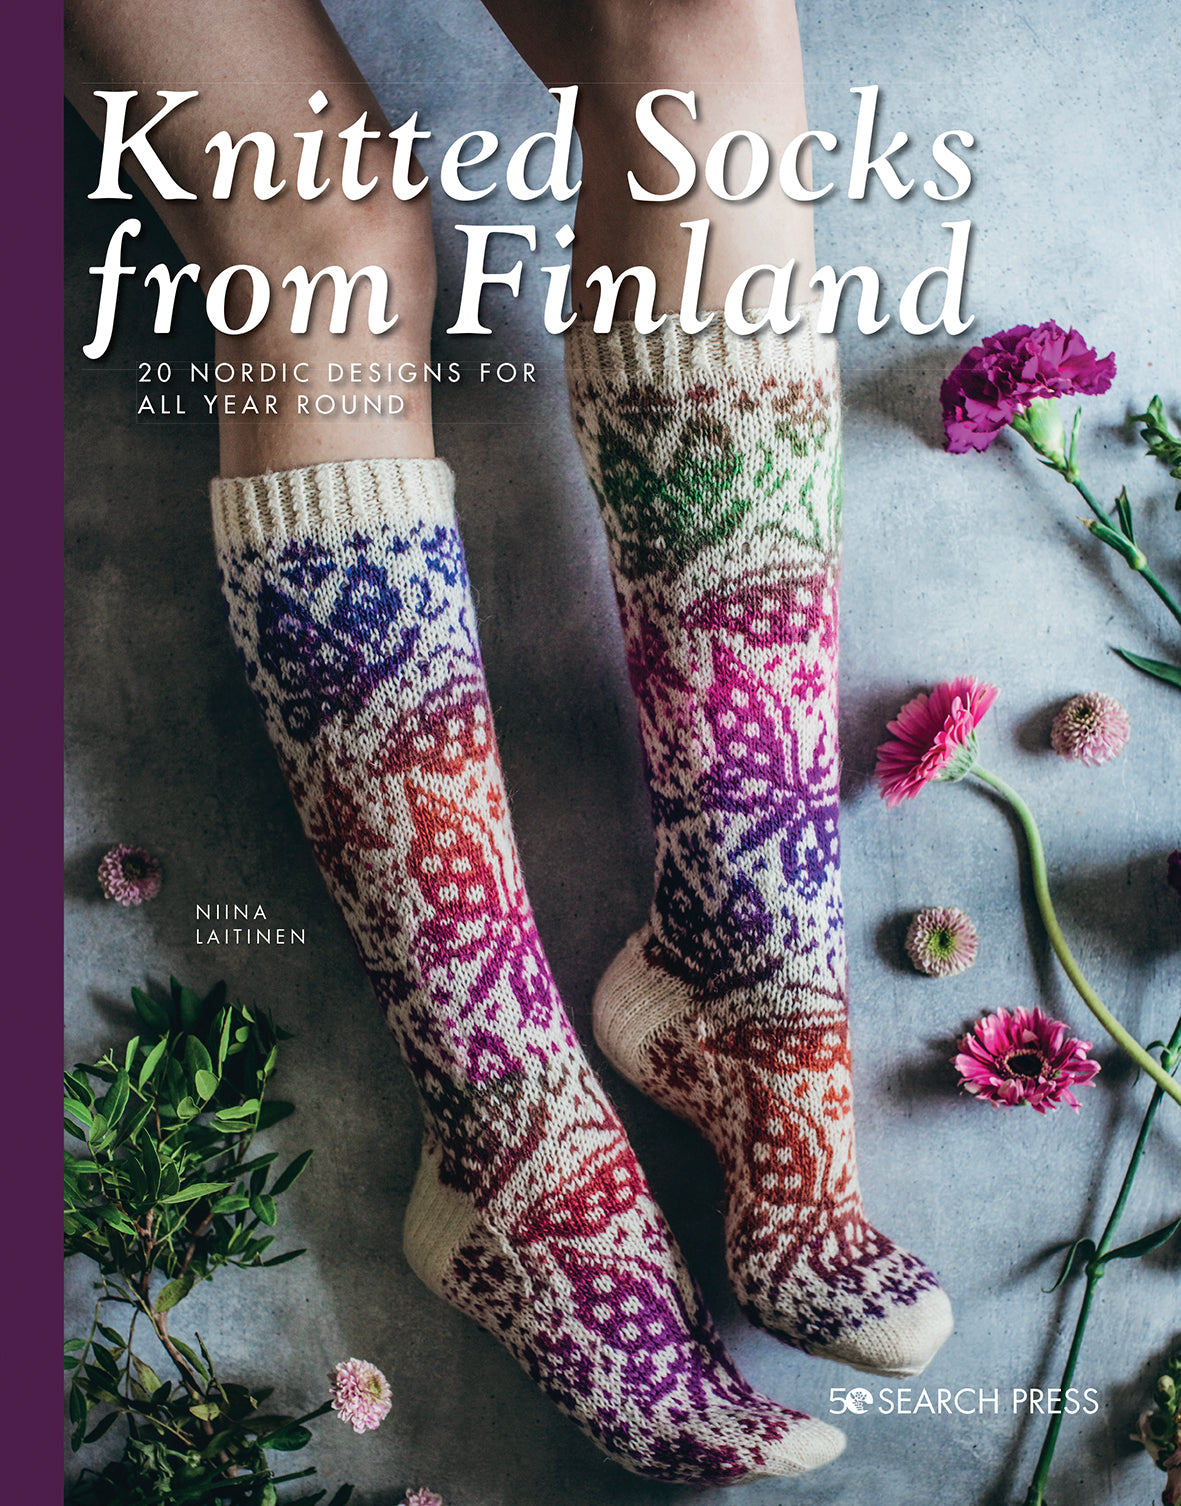 KNITTED SOCKS FROM FINLAND by NIINA LAITINEN - Stephen & Penelope